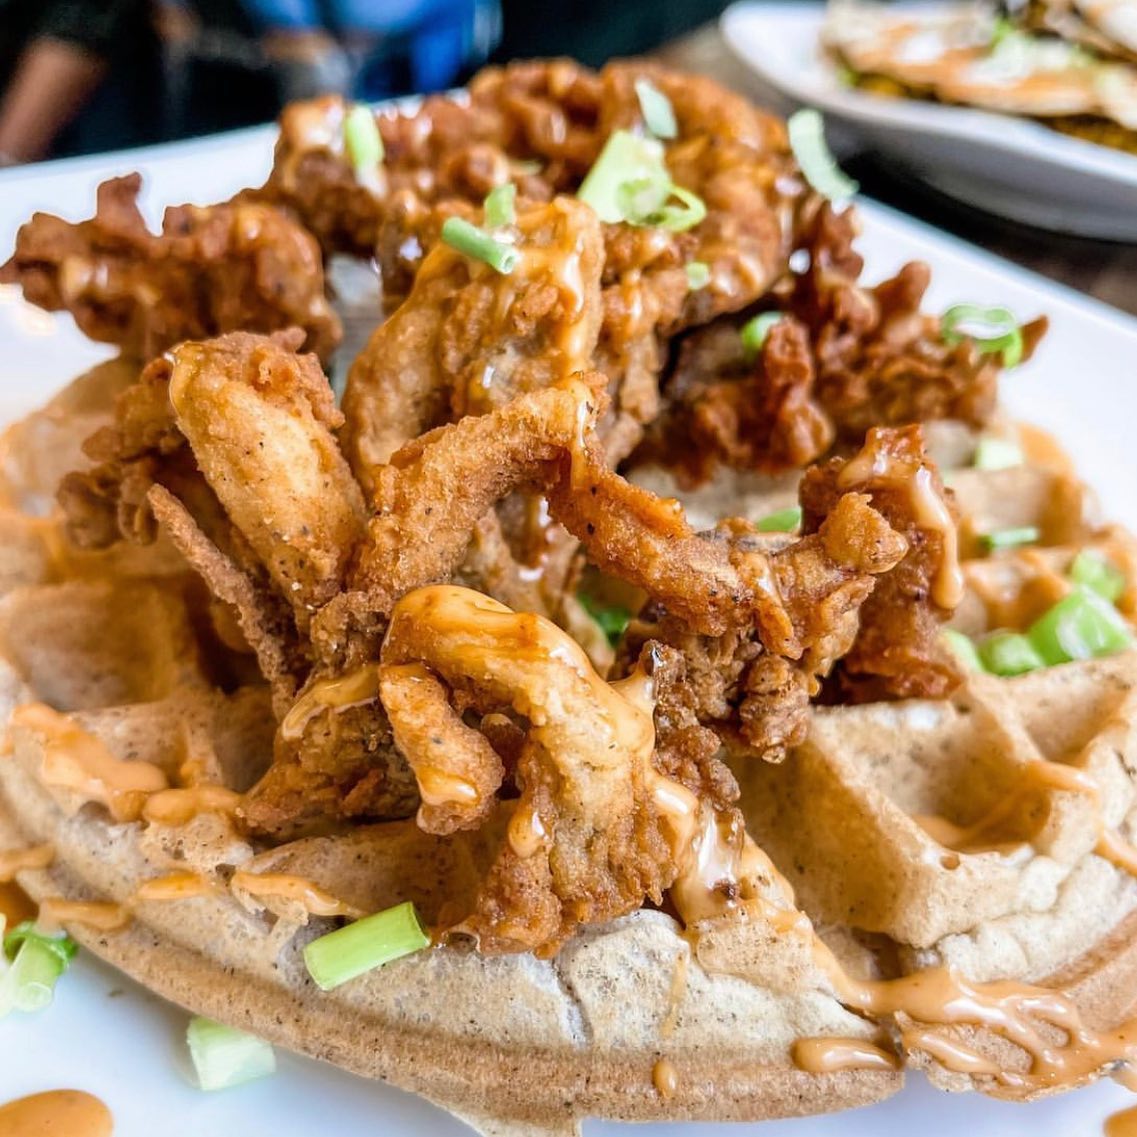 Chicken fried oyster mushrooms atop a Belgian waffle. Some kind of orange sauce is drizzled over top. 